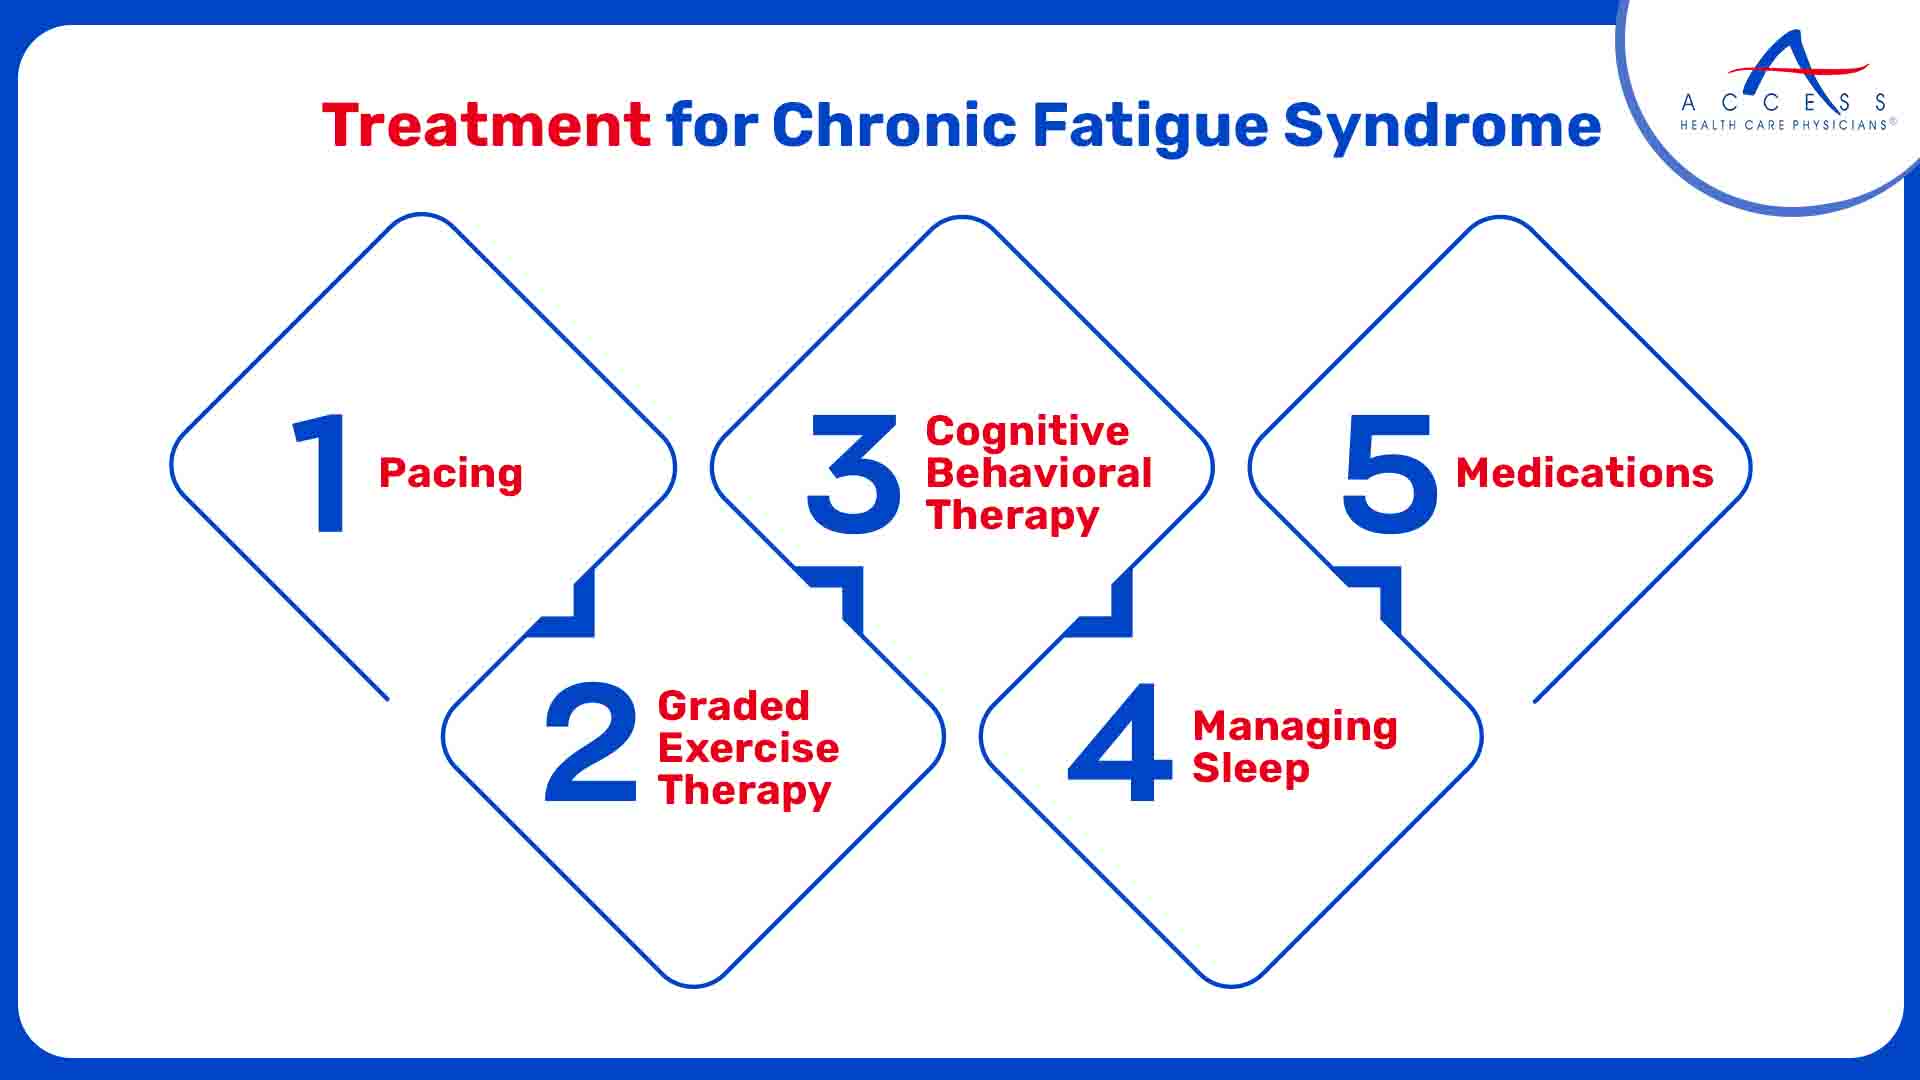 Treatment for Chronic Fatigue Syndrome